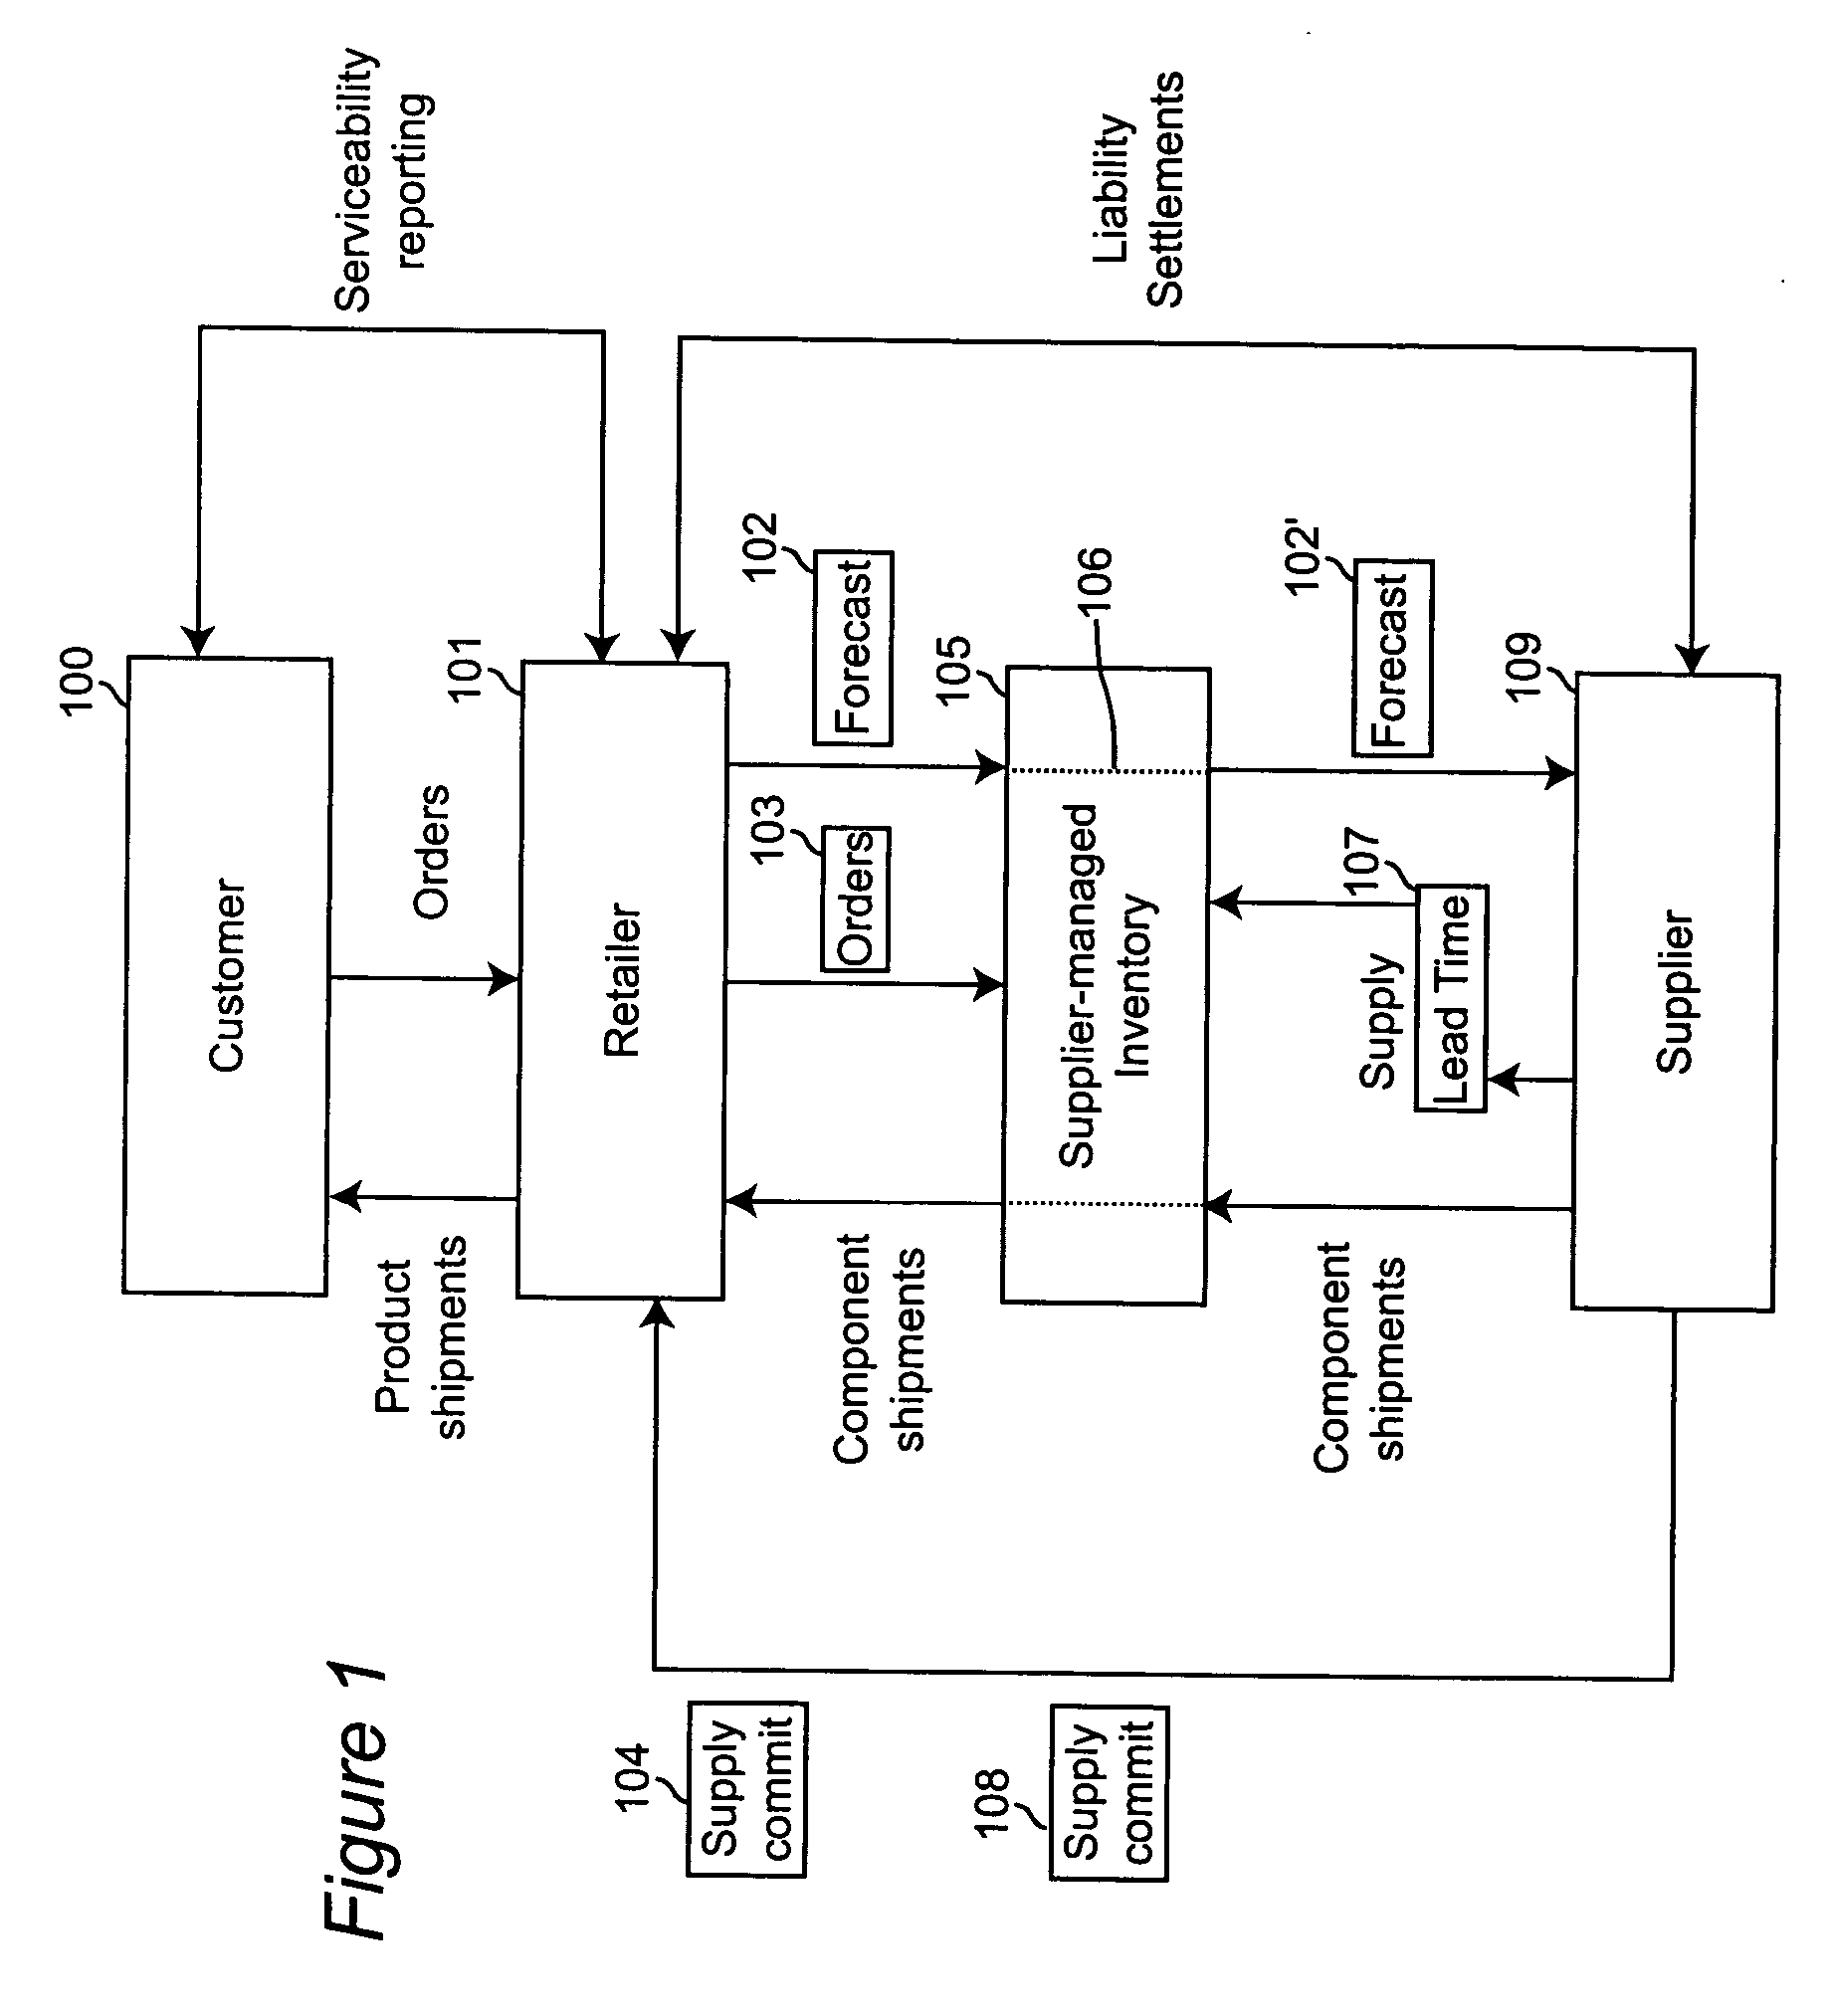 Method and system for balancing asset liability and supply flexibility in extended value networks